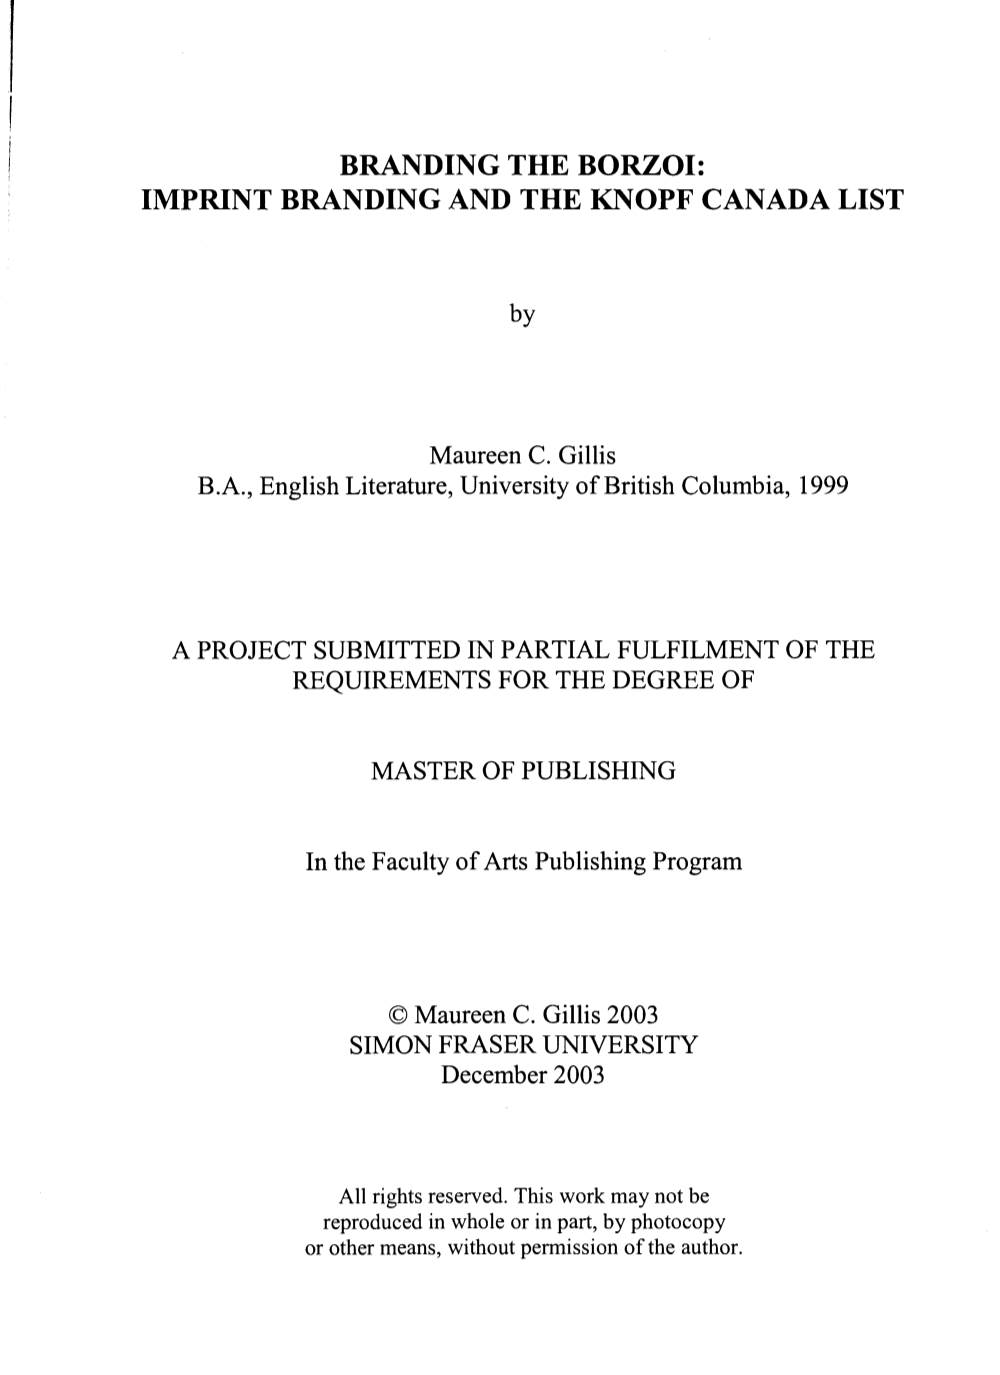 Imprint Branding and the Knopf Canada List